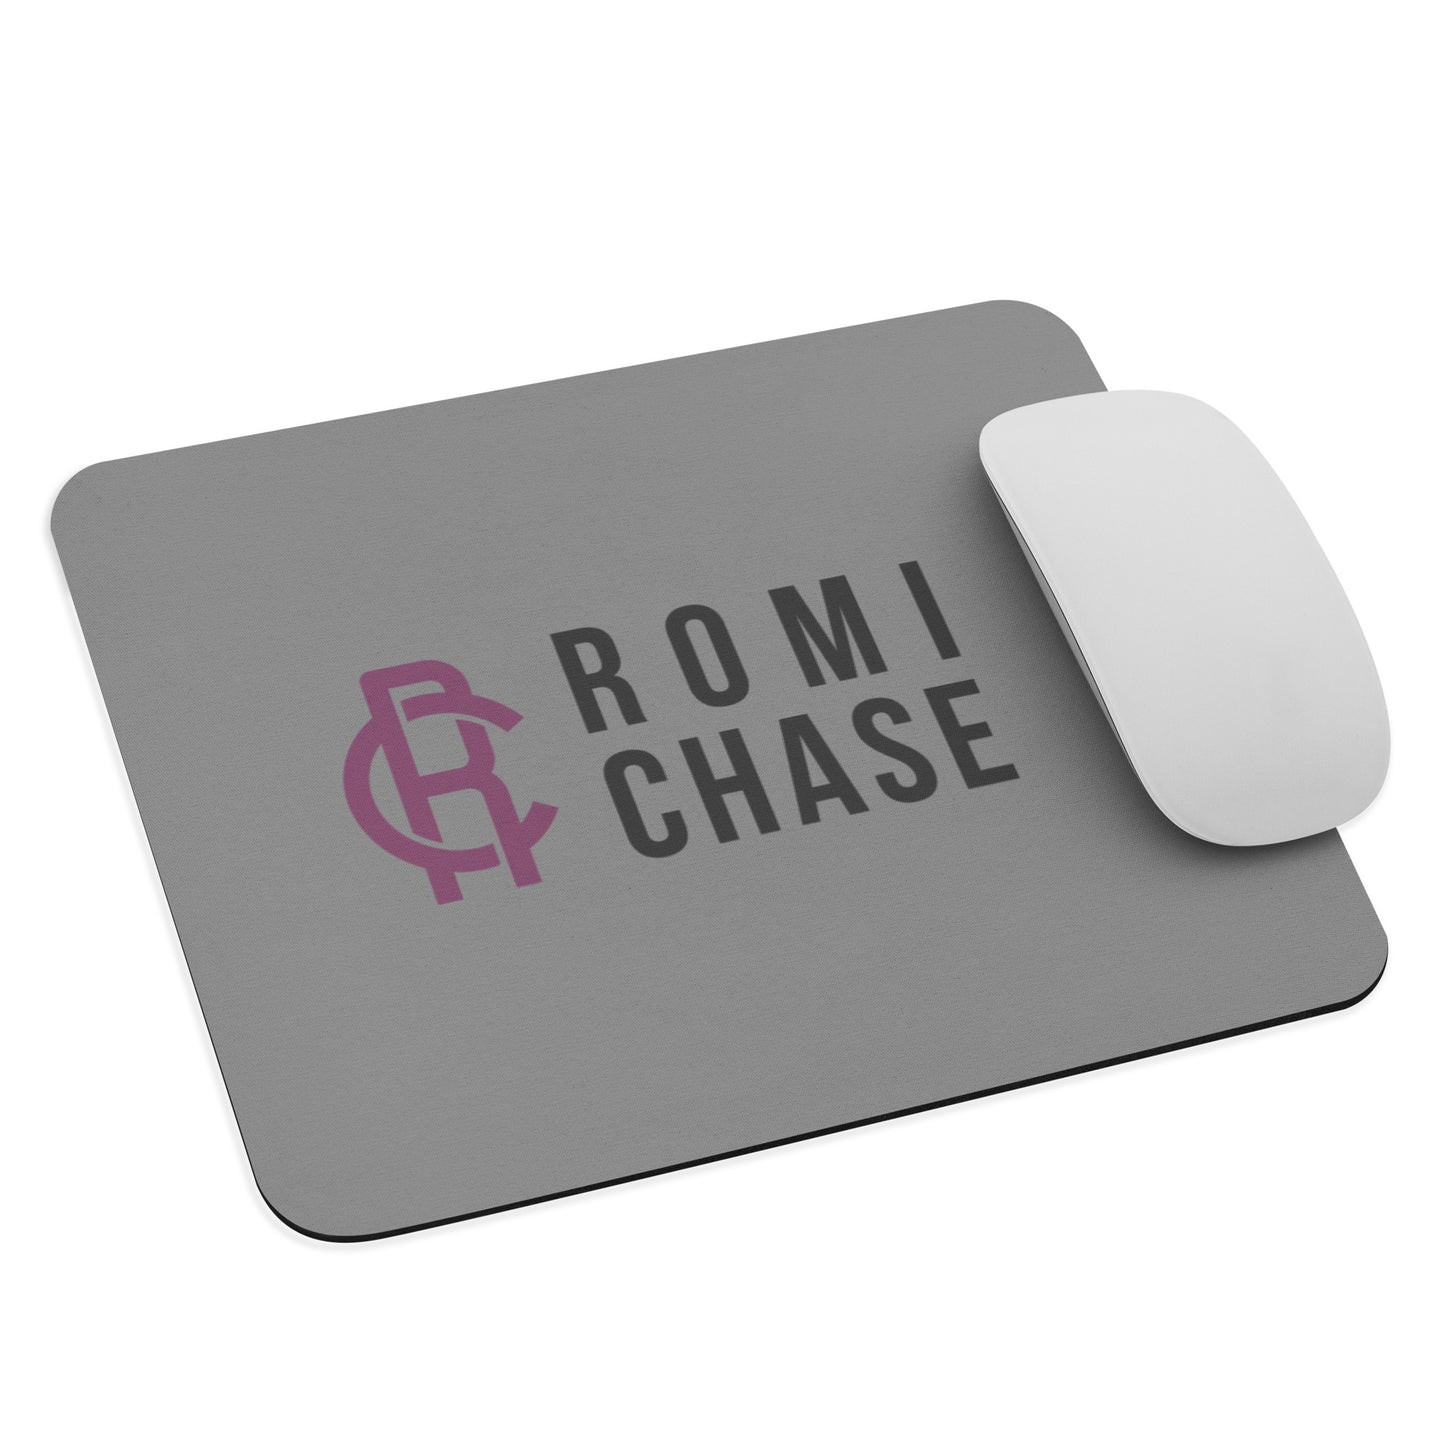 Romi Chase Mouse pad